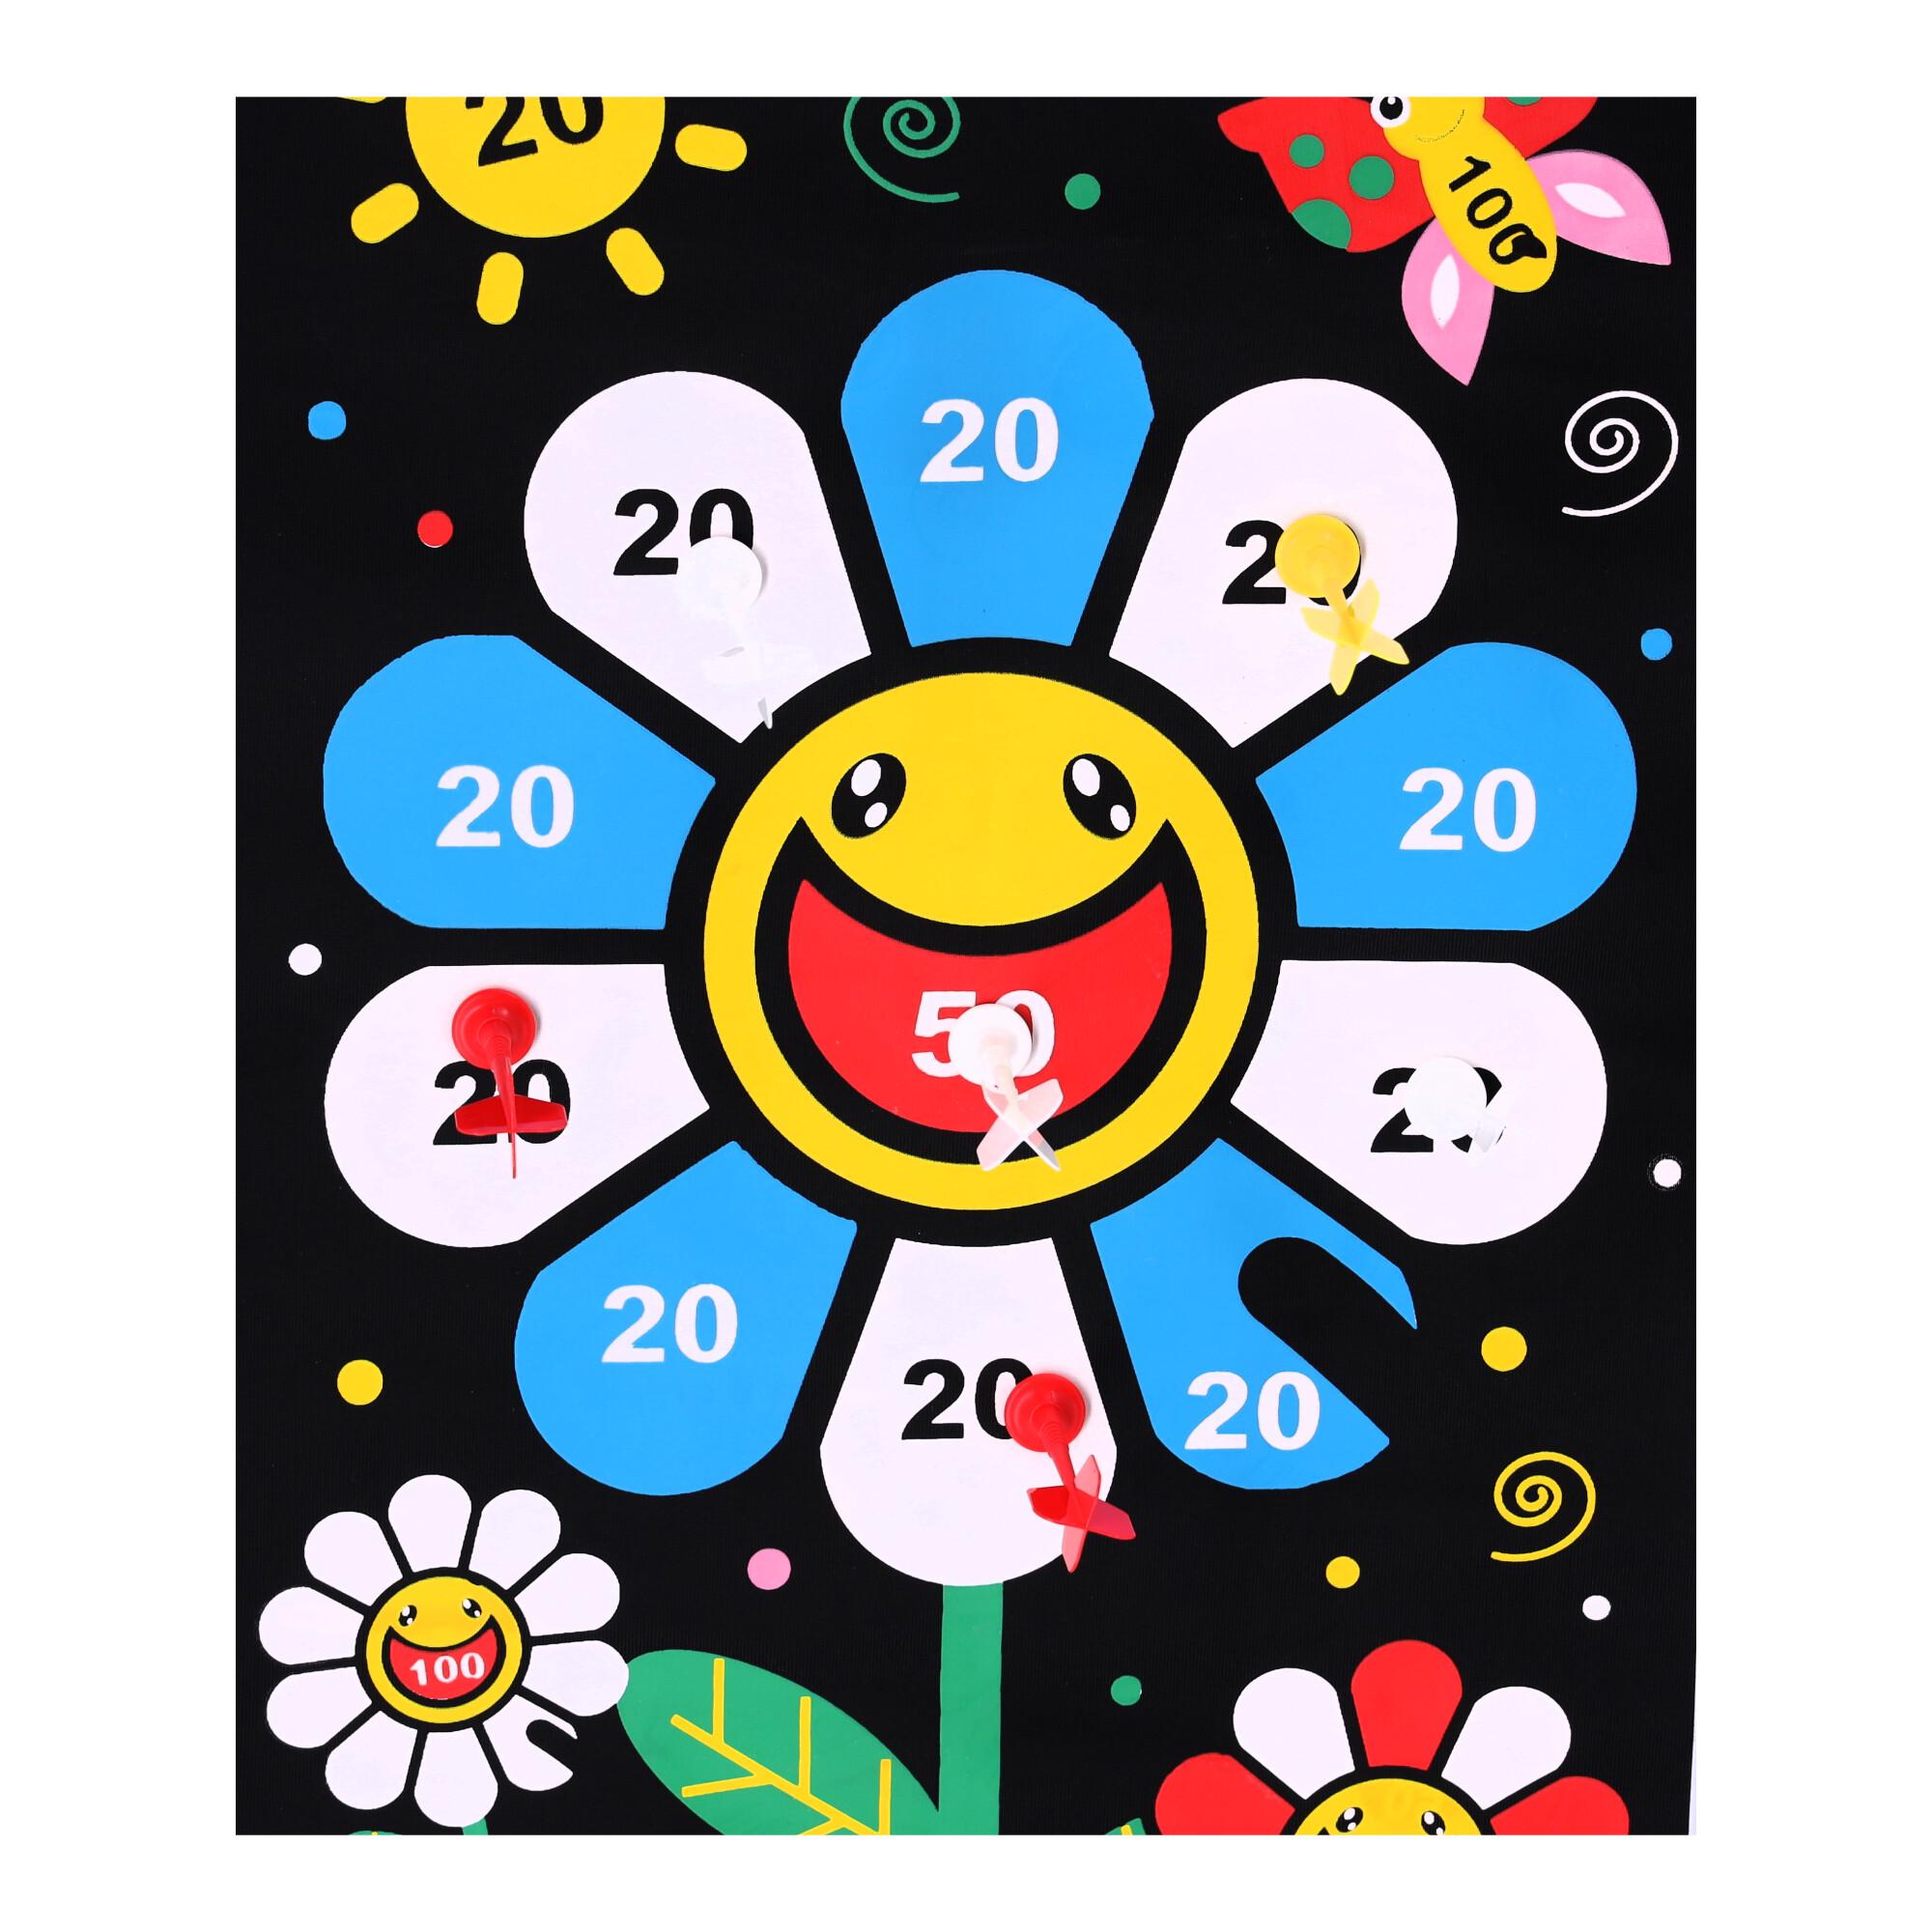 Magnetic target, double-sided with darts - colorful flower